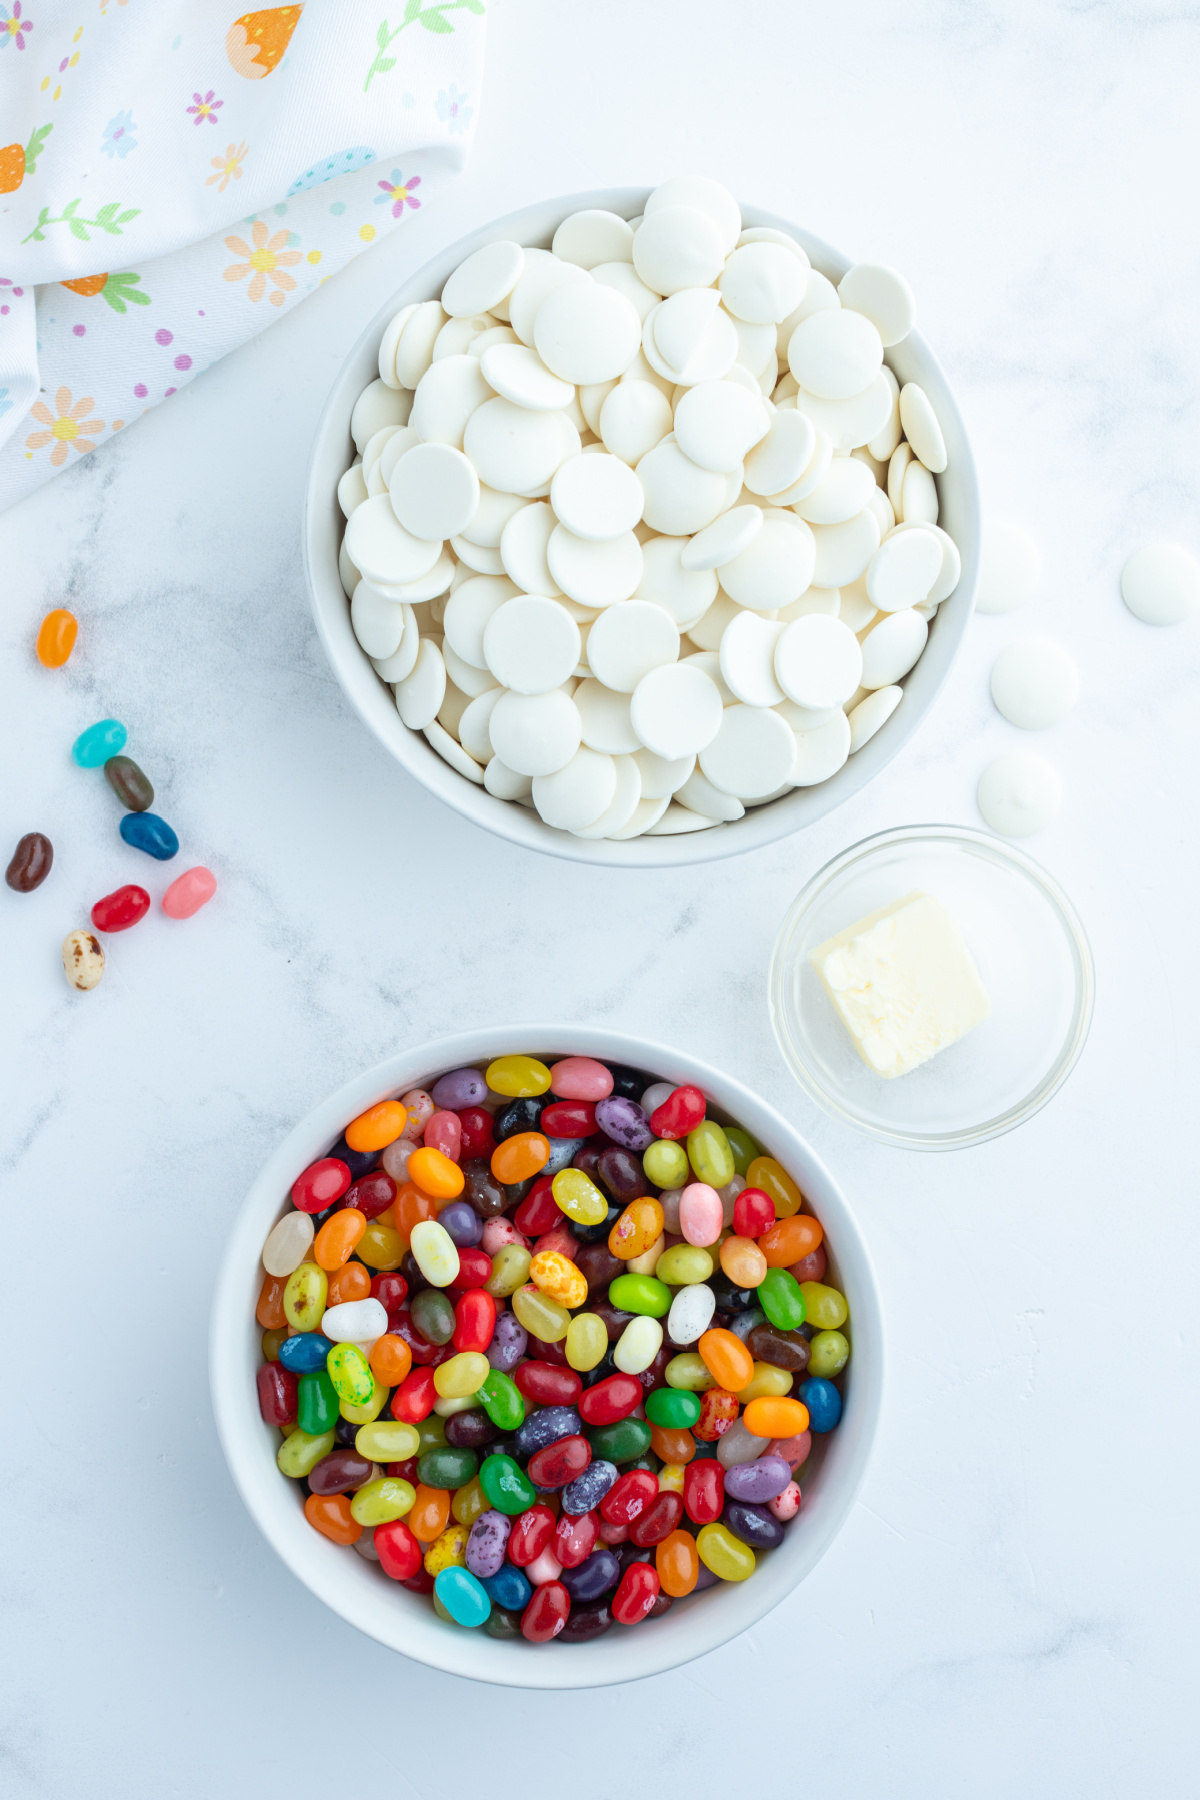 ingredients displayed for making jelly bean bark